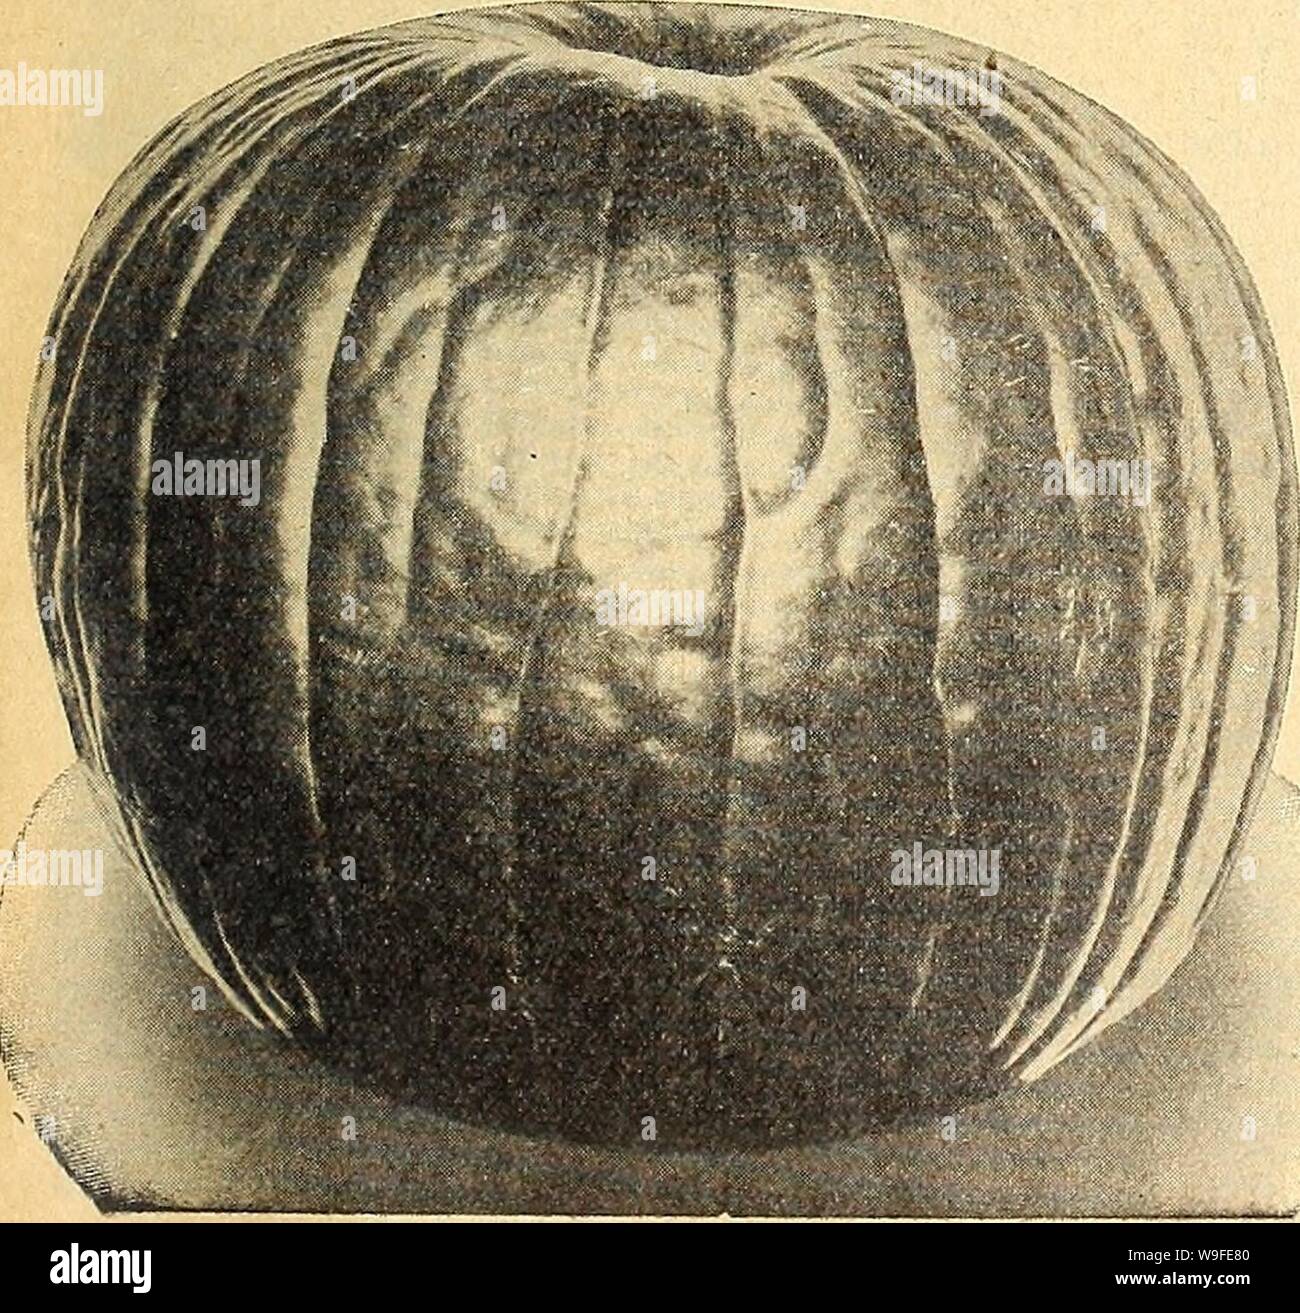 Archive image from page 34 of Currie's farm and garden annual. Currie's farm and garden annual : spring 1920 45th year  curriesfarmgarde19curr 3 Year: 1920 ( Chinese Giant Pepper. PUMPKIN 1 oz. to .30 to 50 hills. 3 to 4 lbs. per acre. Golden DawnâSimilar in size and shape to Bull Nose, but a beautiful golden yellow. Pkt. 10c;  oz. 30c; 1 oz. 50c; Vi lb. $1.70. Chili RedâLargely used in the manufacture of pepper sauce; very prolific. Pkt. 5c;  oz. 25c; 1 oz. 45c; Vi lb. $1.45.    Q.uaker PieâOval in shape, tapering to ends, creamy white. Pkt. 5c; oz. 15c; 14 lb. 40c; 1 lb. $1.40. Large Cheese, Stock Photo